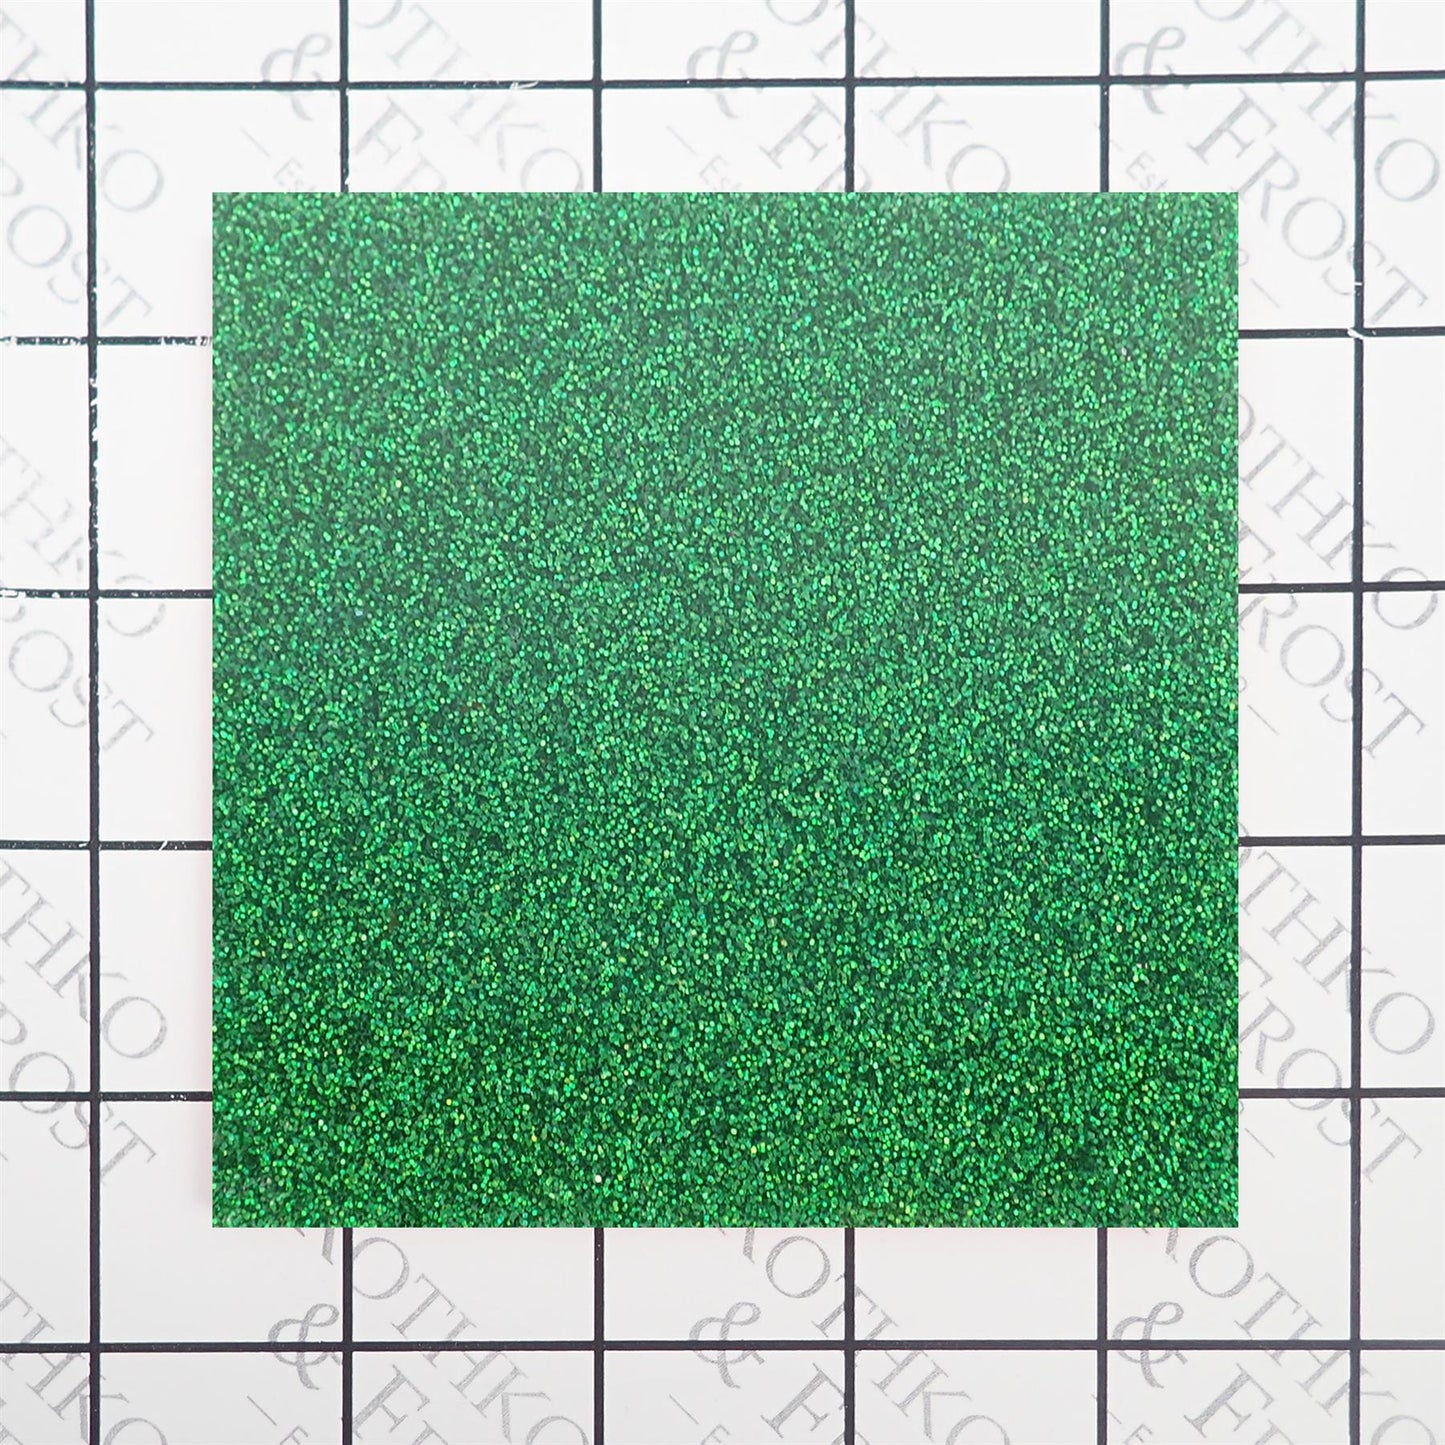 Incudo Grass Green 2-Sided Holographic Glitter Acrylic Sheet - 98x98x3mm (3.9x3.86x0.12"), Sample